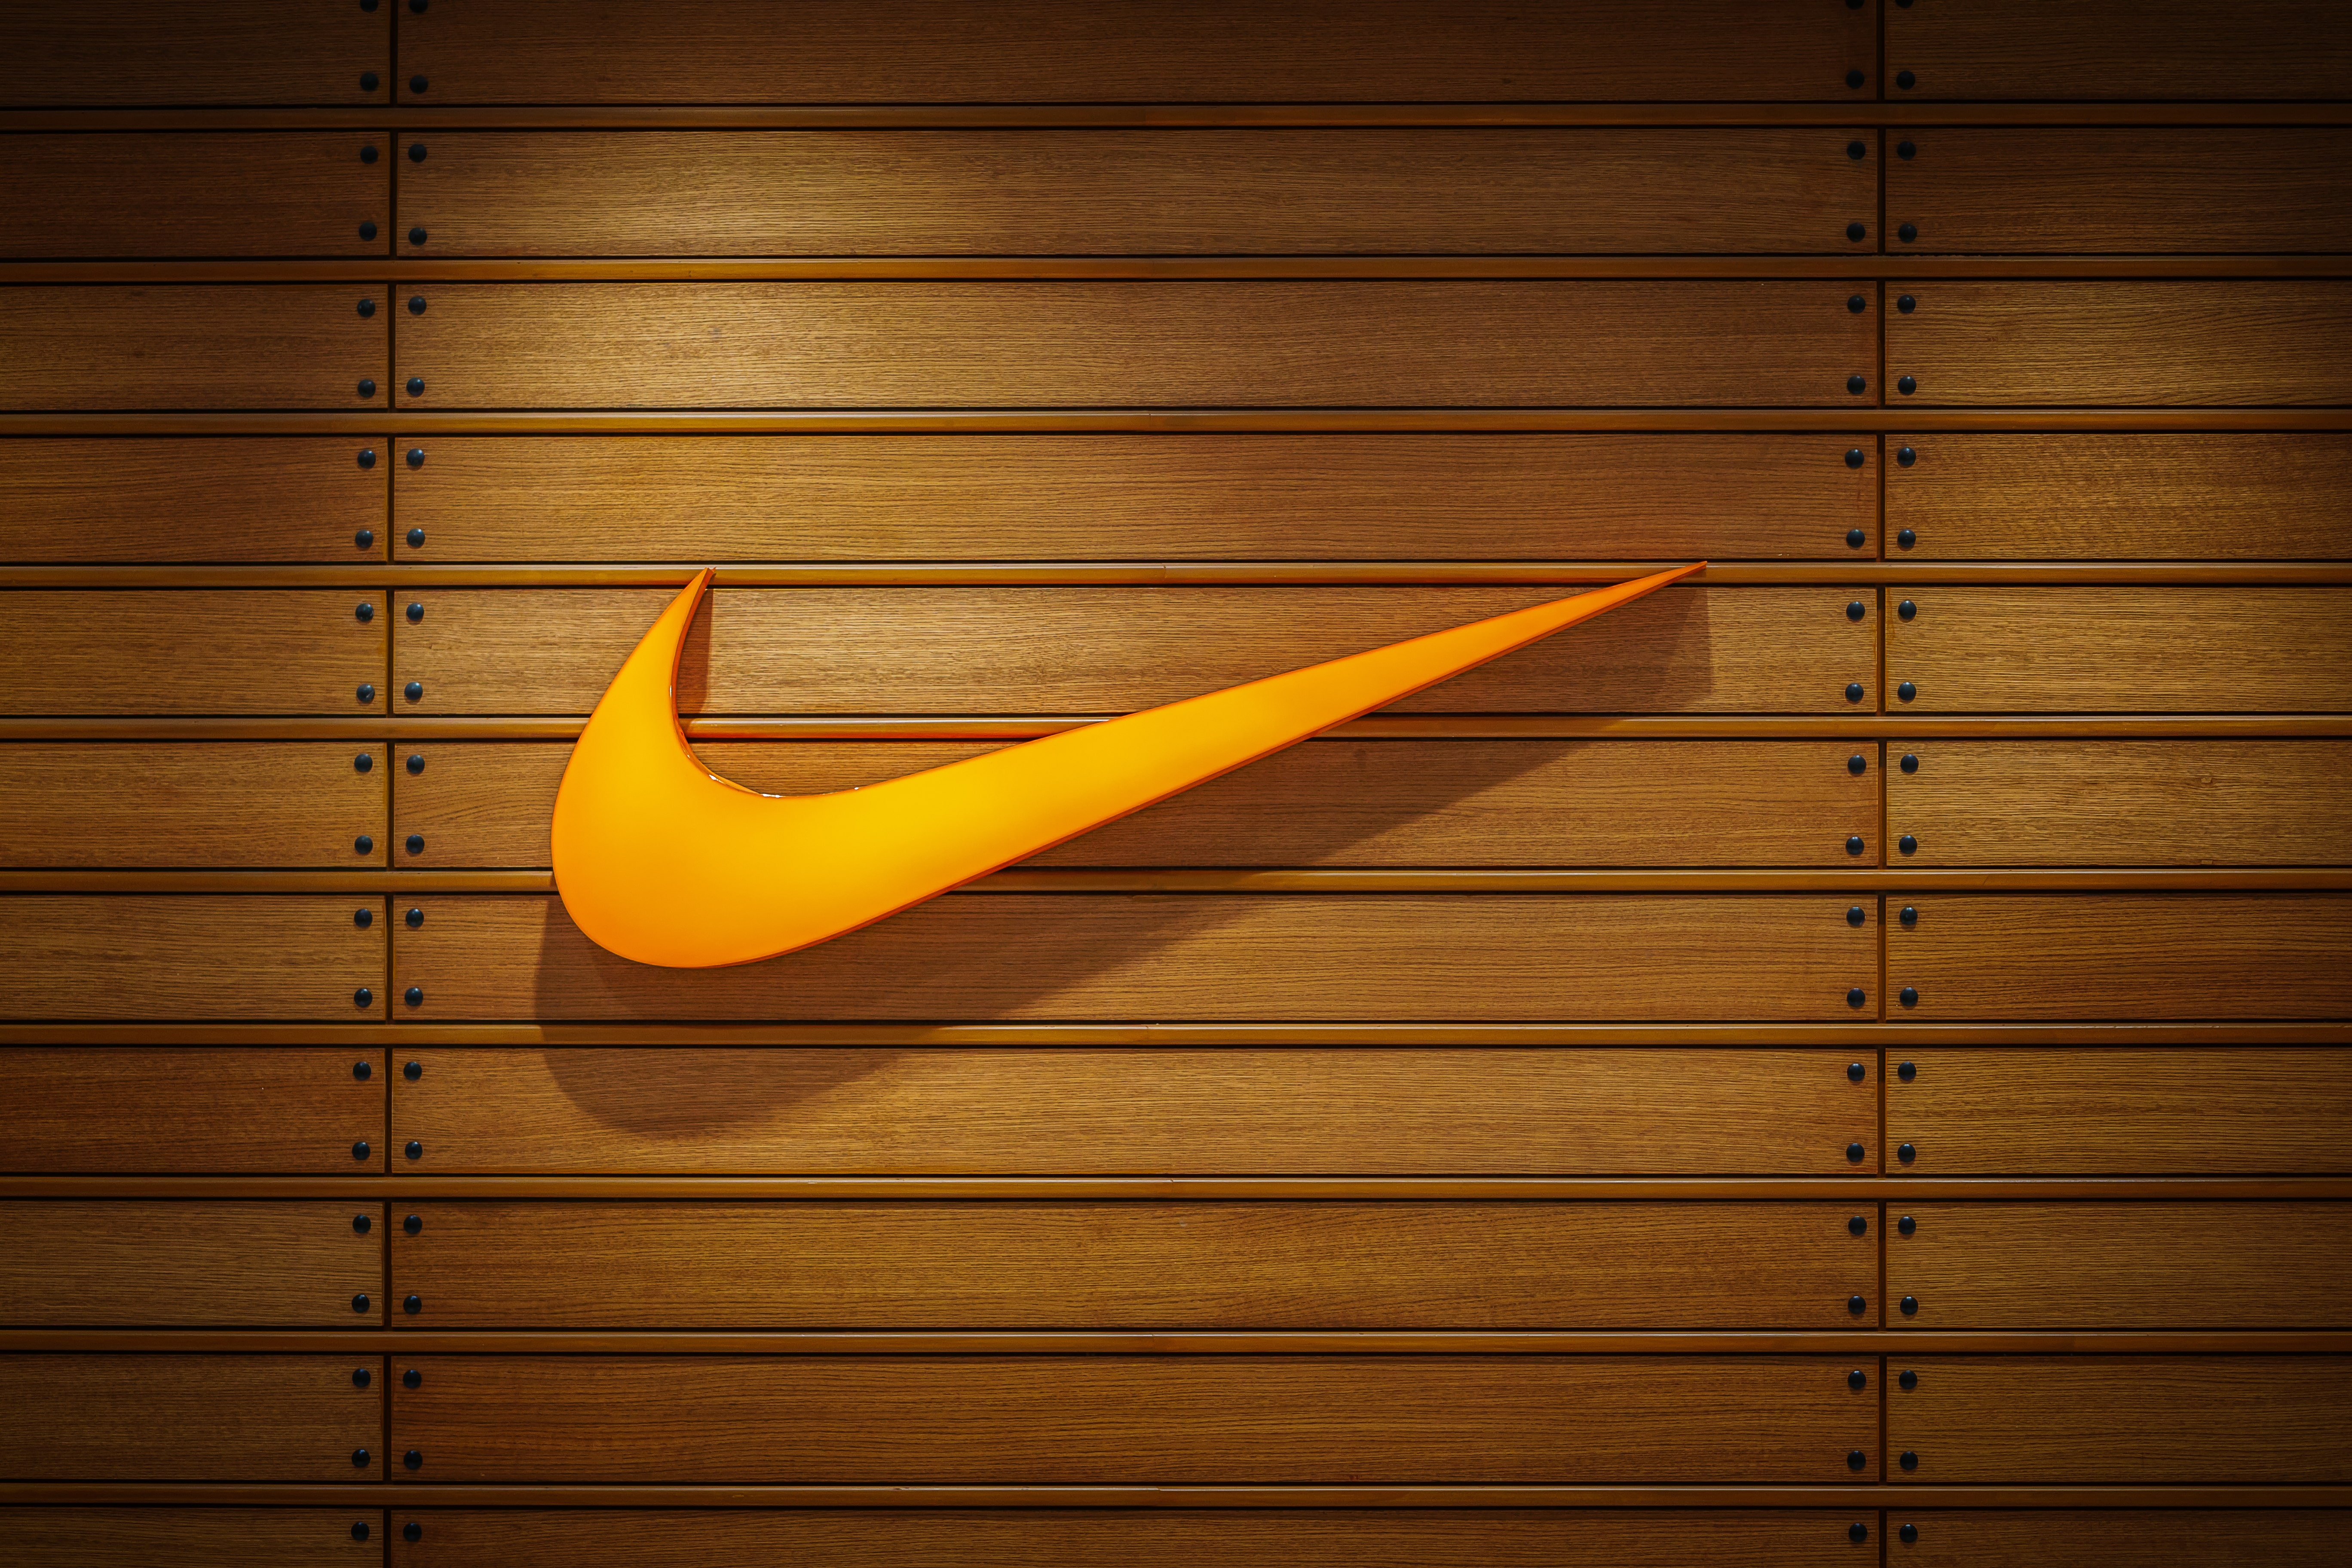 Tuesday's Market Minute: Nike (NKE) Earnings Preview